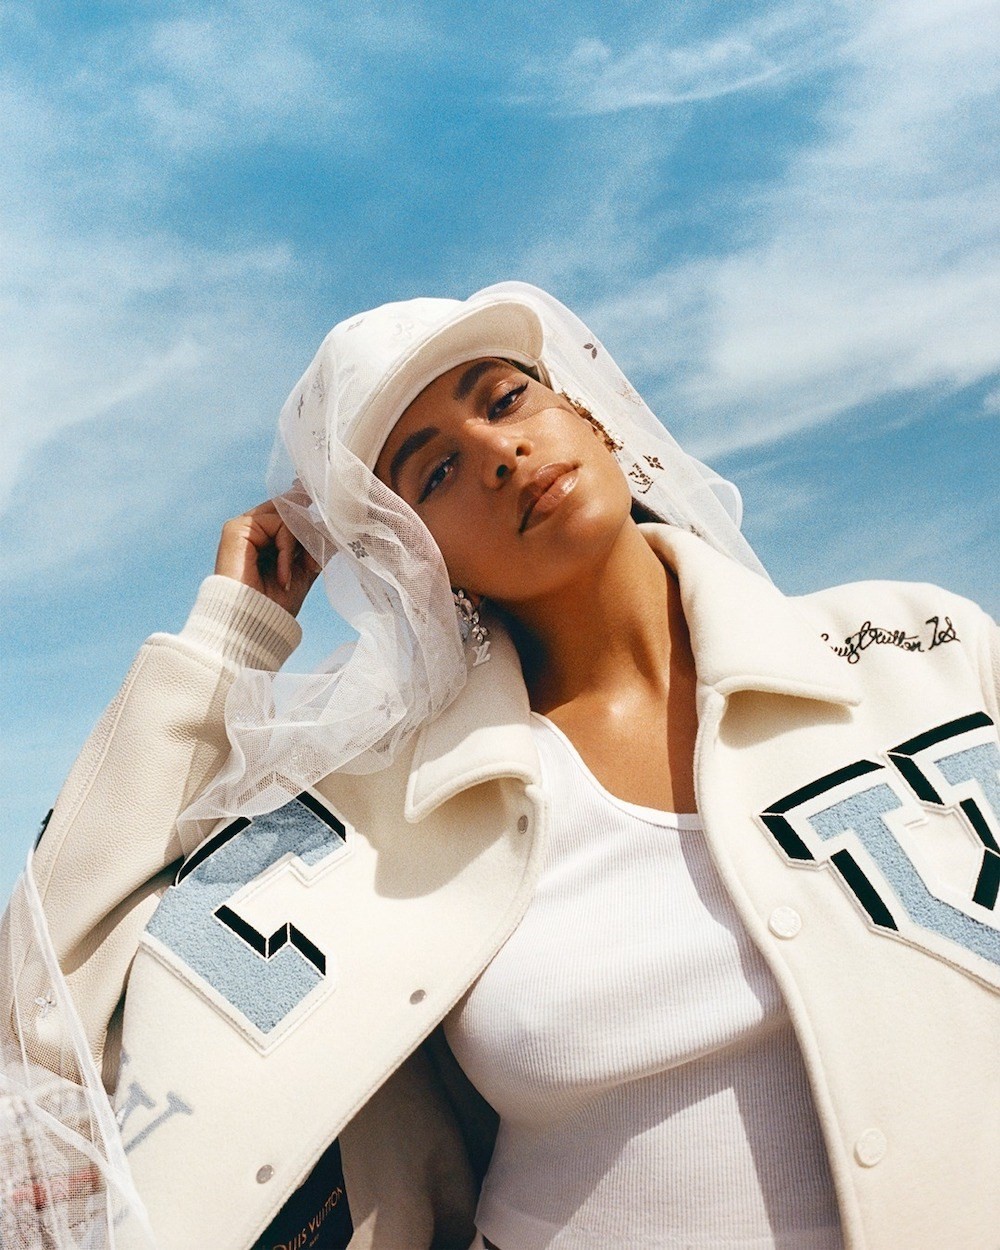 Dazed and Confused Magazine - As a new Louis Vuitton editorial from the  pages of Dazed gets its debut, Virgil Abloh talks recontextualising the  past and the power of collaboration See more